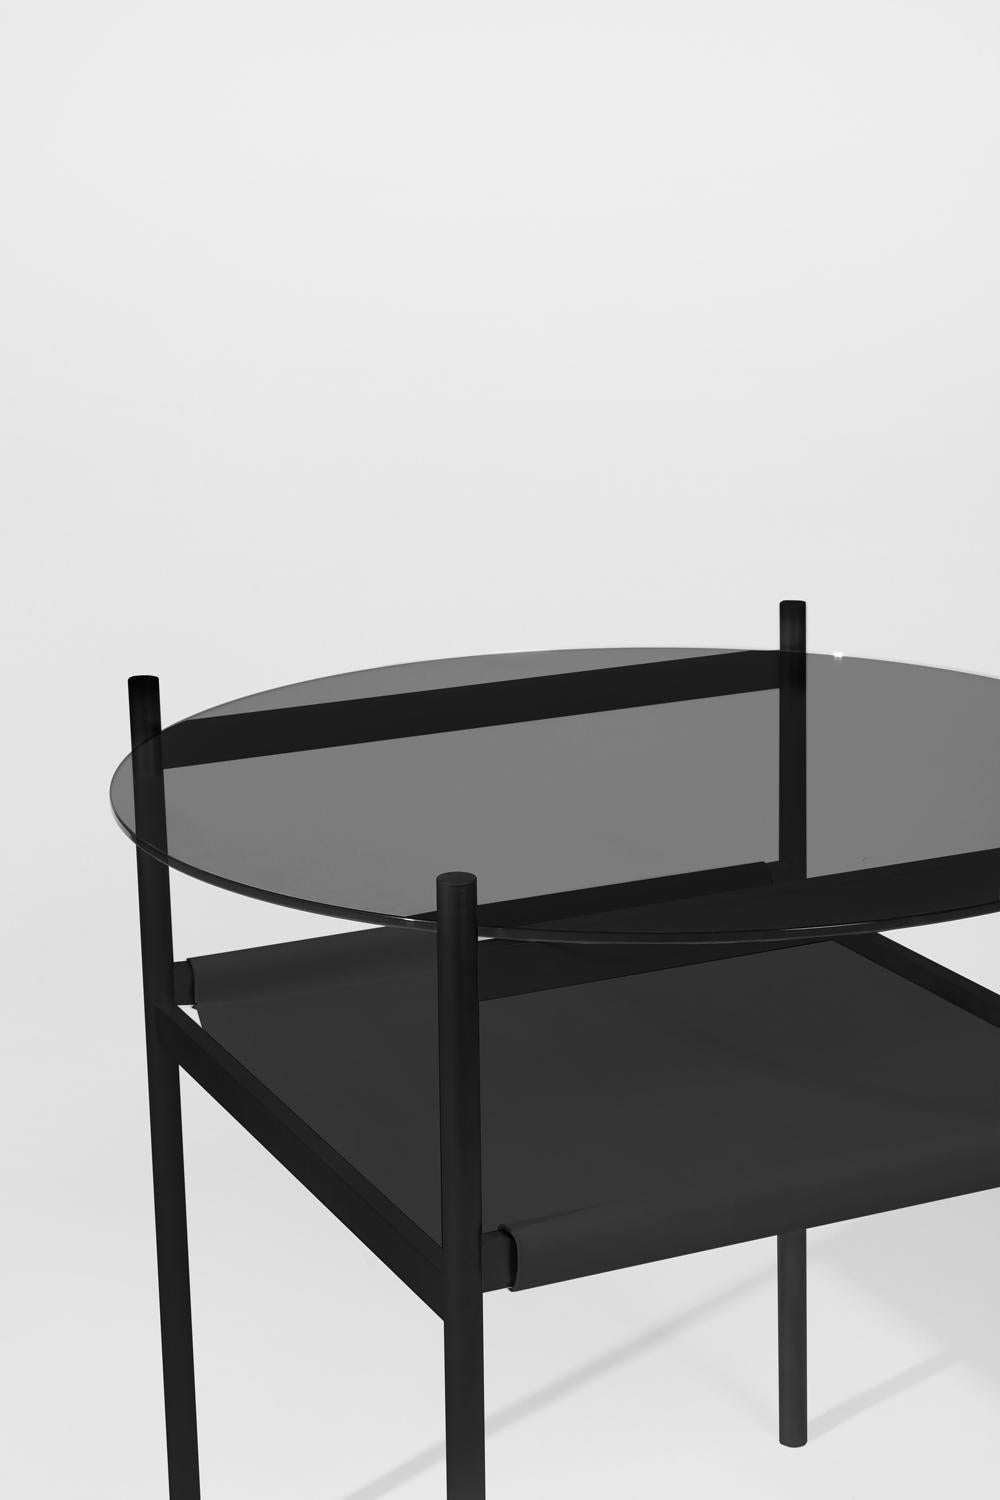 Made to order. Please allow 6 weeks for production.

Black frame / Smoked glass / Black leather sling.

The Duotone Furniture series is based on a modular hardware system that pairs sturdy construction with visual lightness and a range of